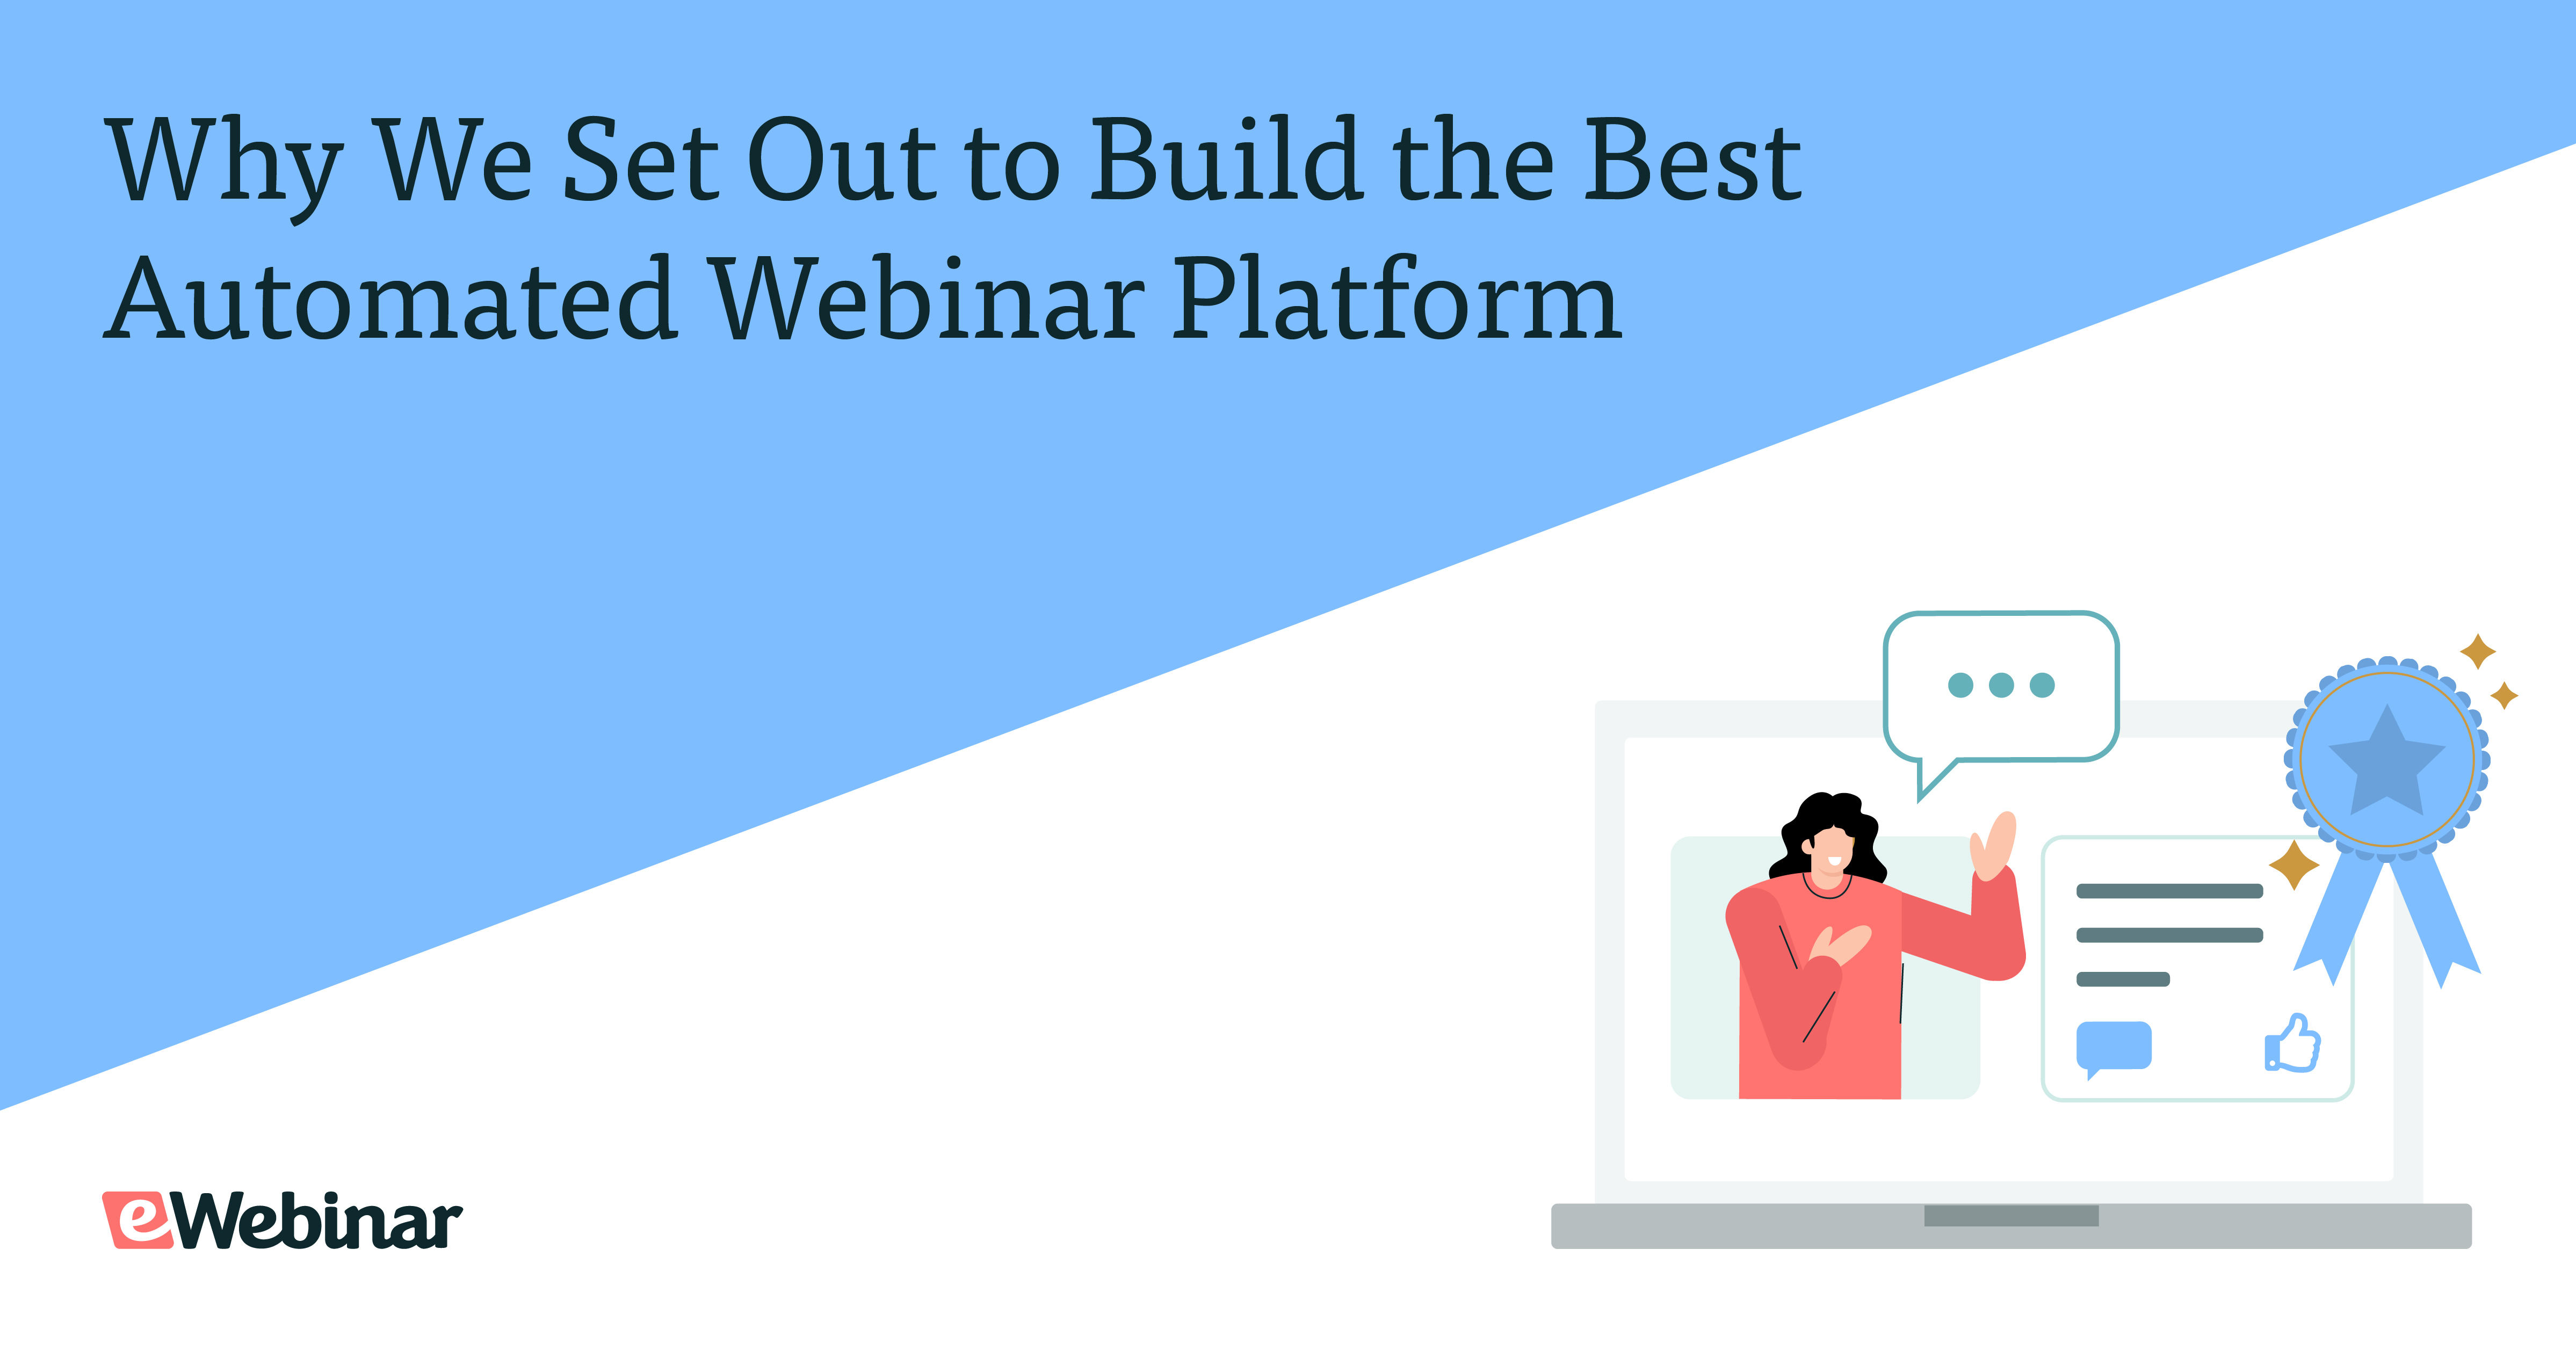 Why We Set Out to Build the Best Automated Webinar Platform